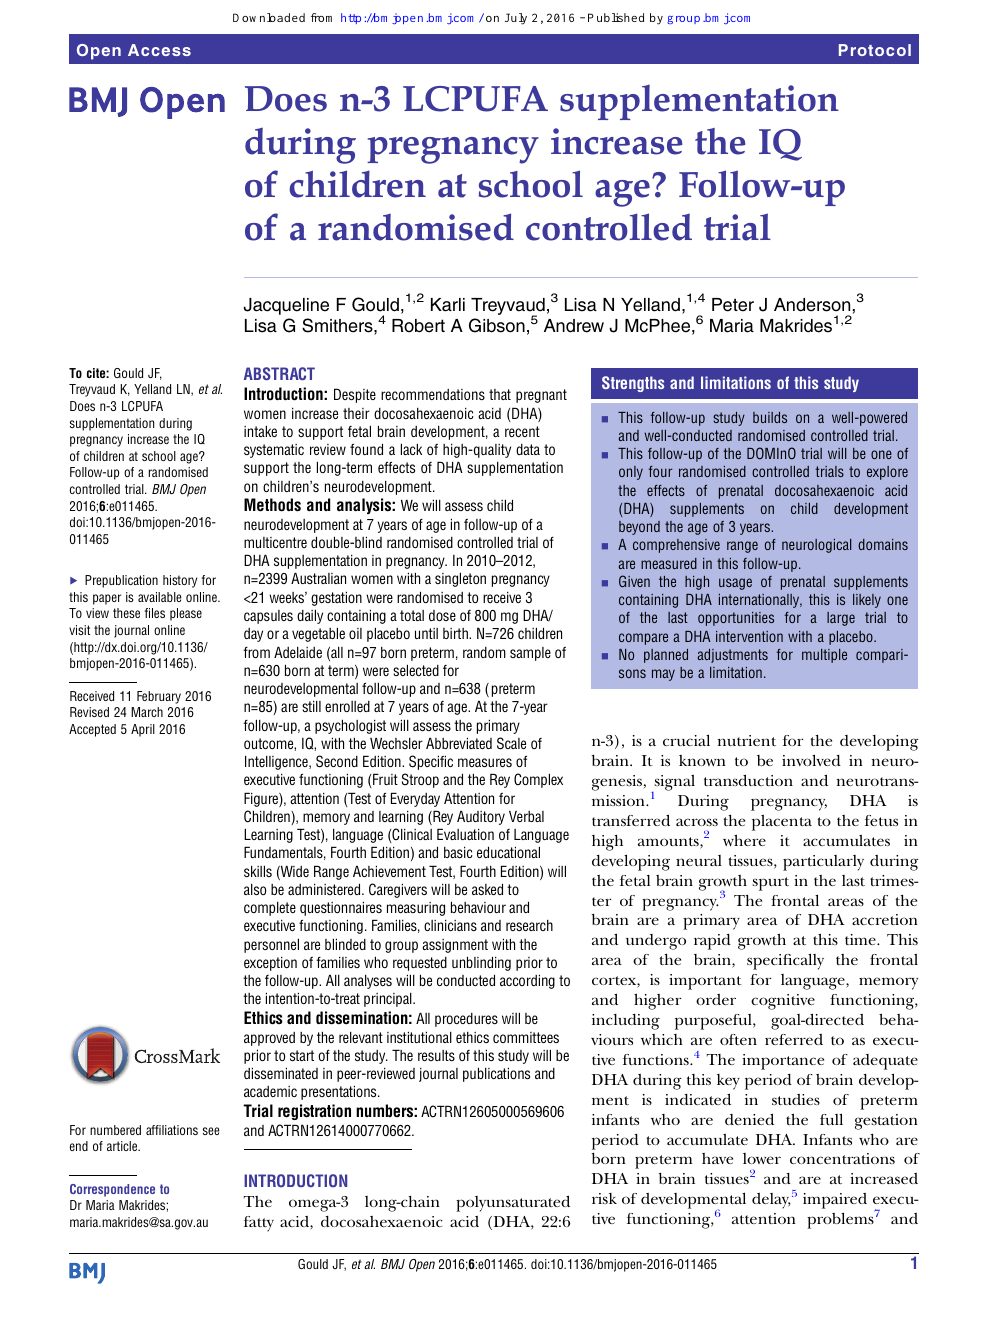 Does N 3 Lcpufa Supplementation During Pregnancy Increase The Iq Of Children At School Age Follow Up Of A Randomised Controlled Trial Topic Of Research Paper In Psychology Download Scholarly Article Pdf And